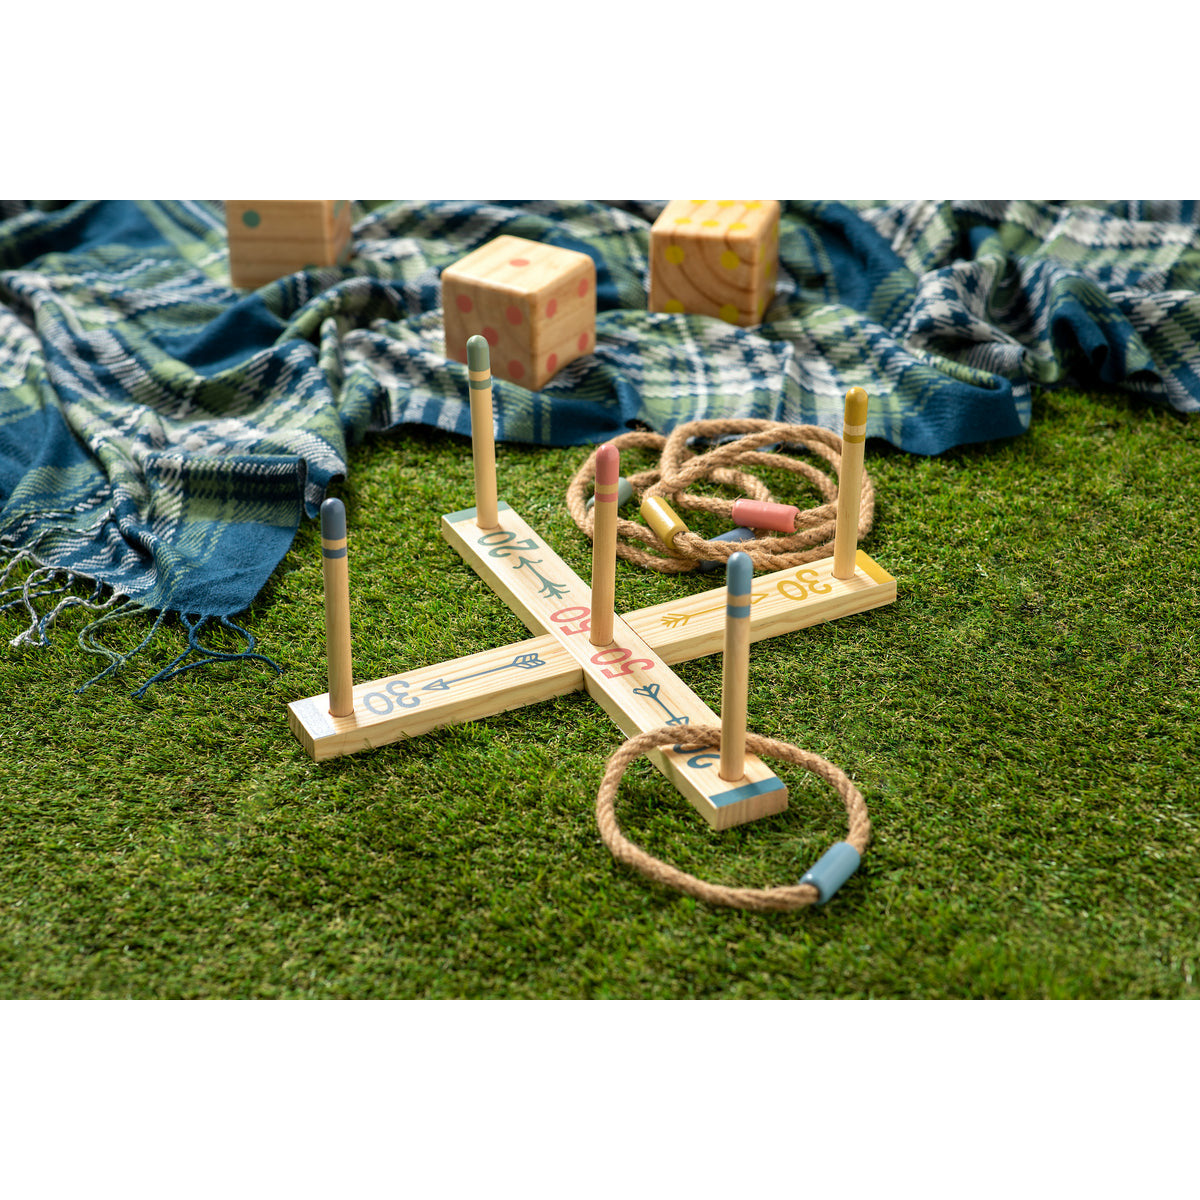 Fling it & Ring it Ring Toss Game in grass - Smockingbird's Unique Gifts